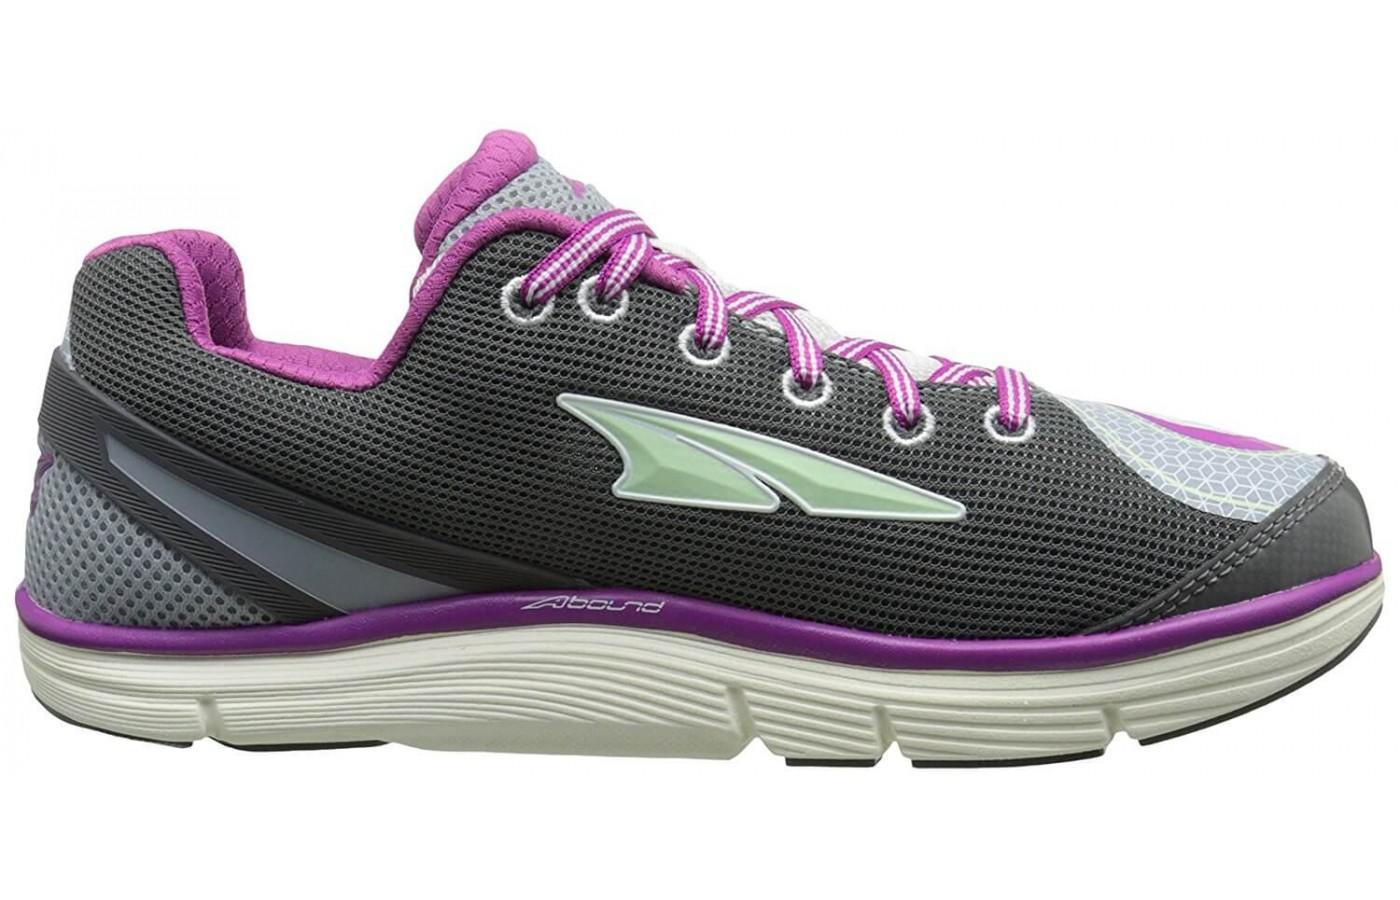 Altra Intuition 3.5 Review - To buy or not in 2023 - StripeFit